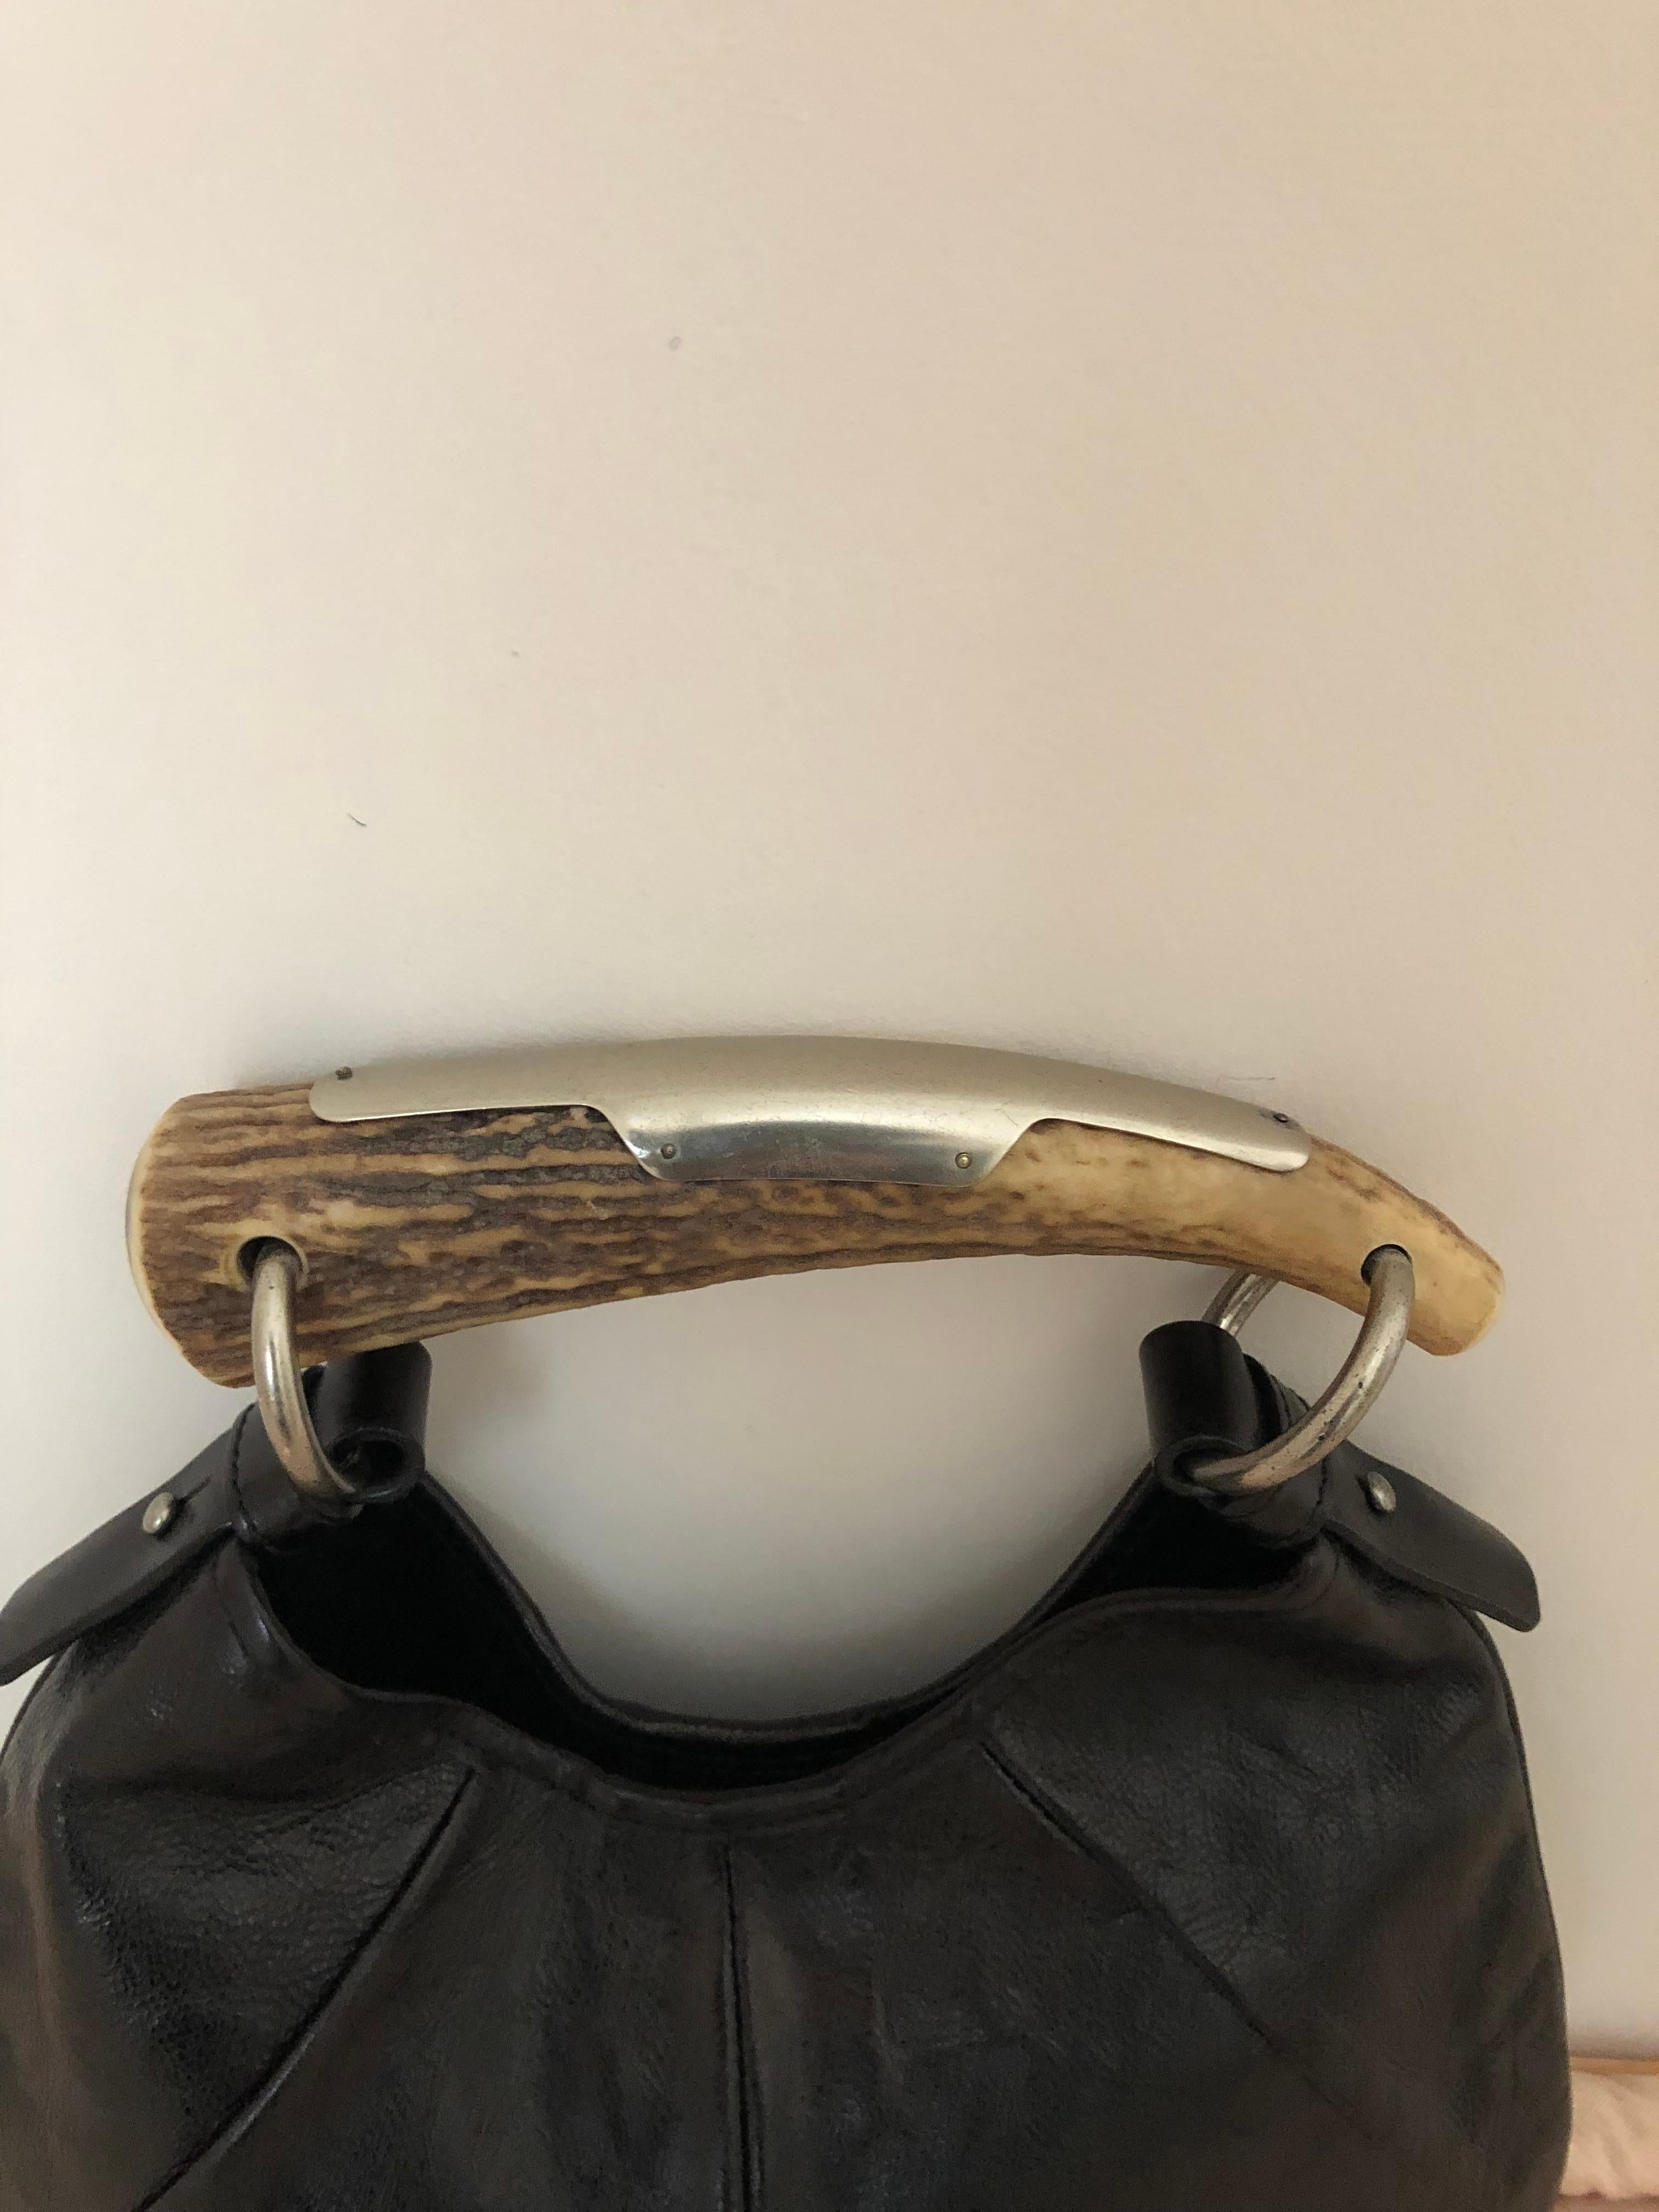 This is an early 2000s Tom Ford for Yves Saint Laurent black textured caviar leather hobo handbag, with a deer horn silver trimmed handle. It has a black suede lined interior with a patch pocket and a snap closure at top.
The bag was made in Italy